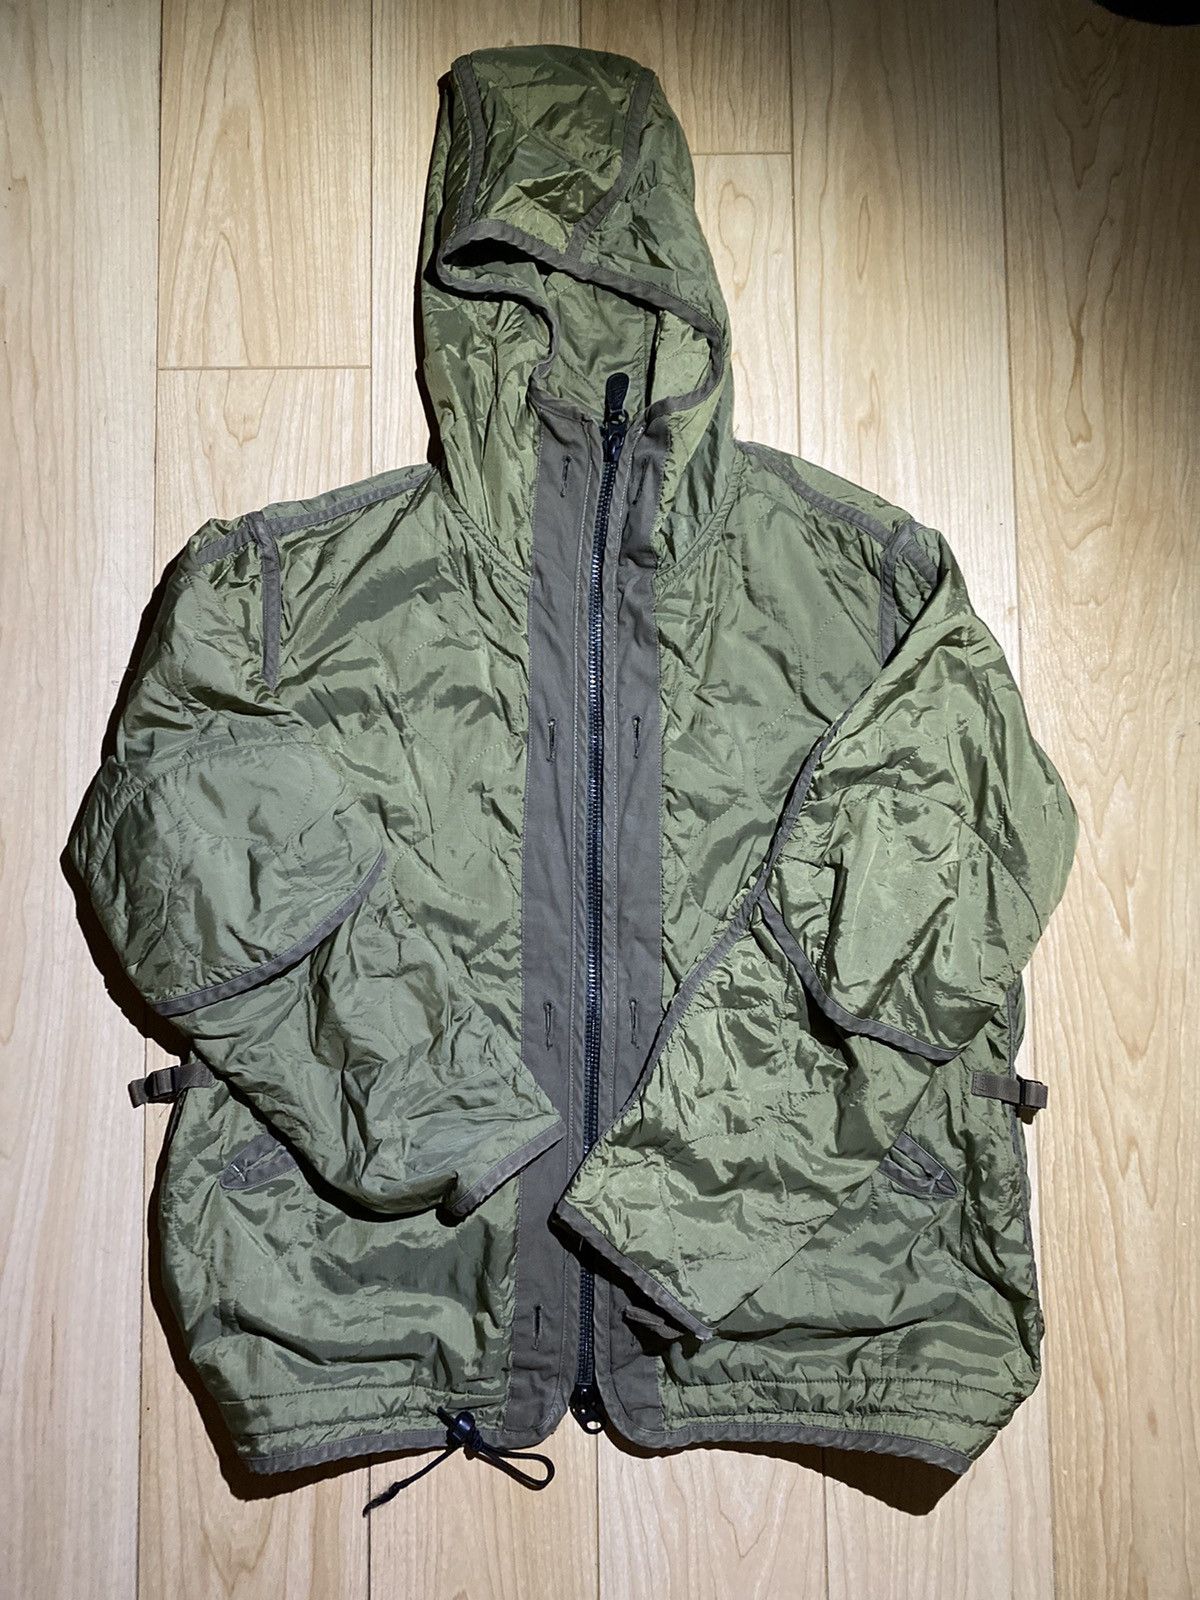 General Research General Research Light Jacket | Grailed